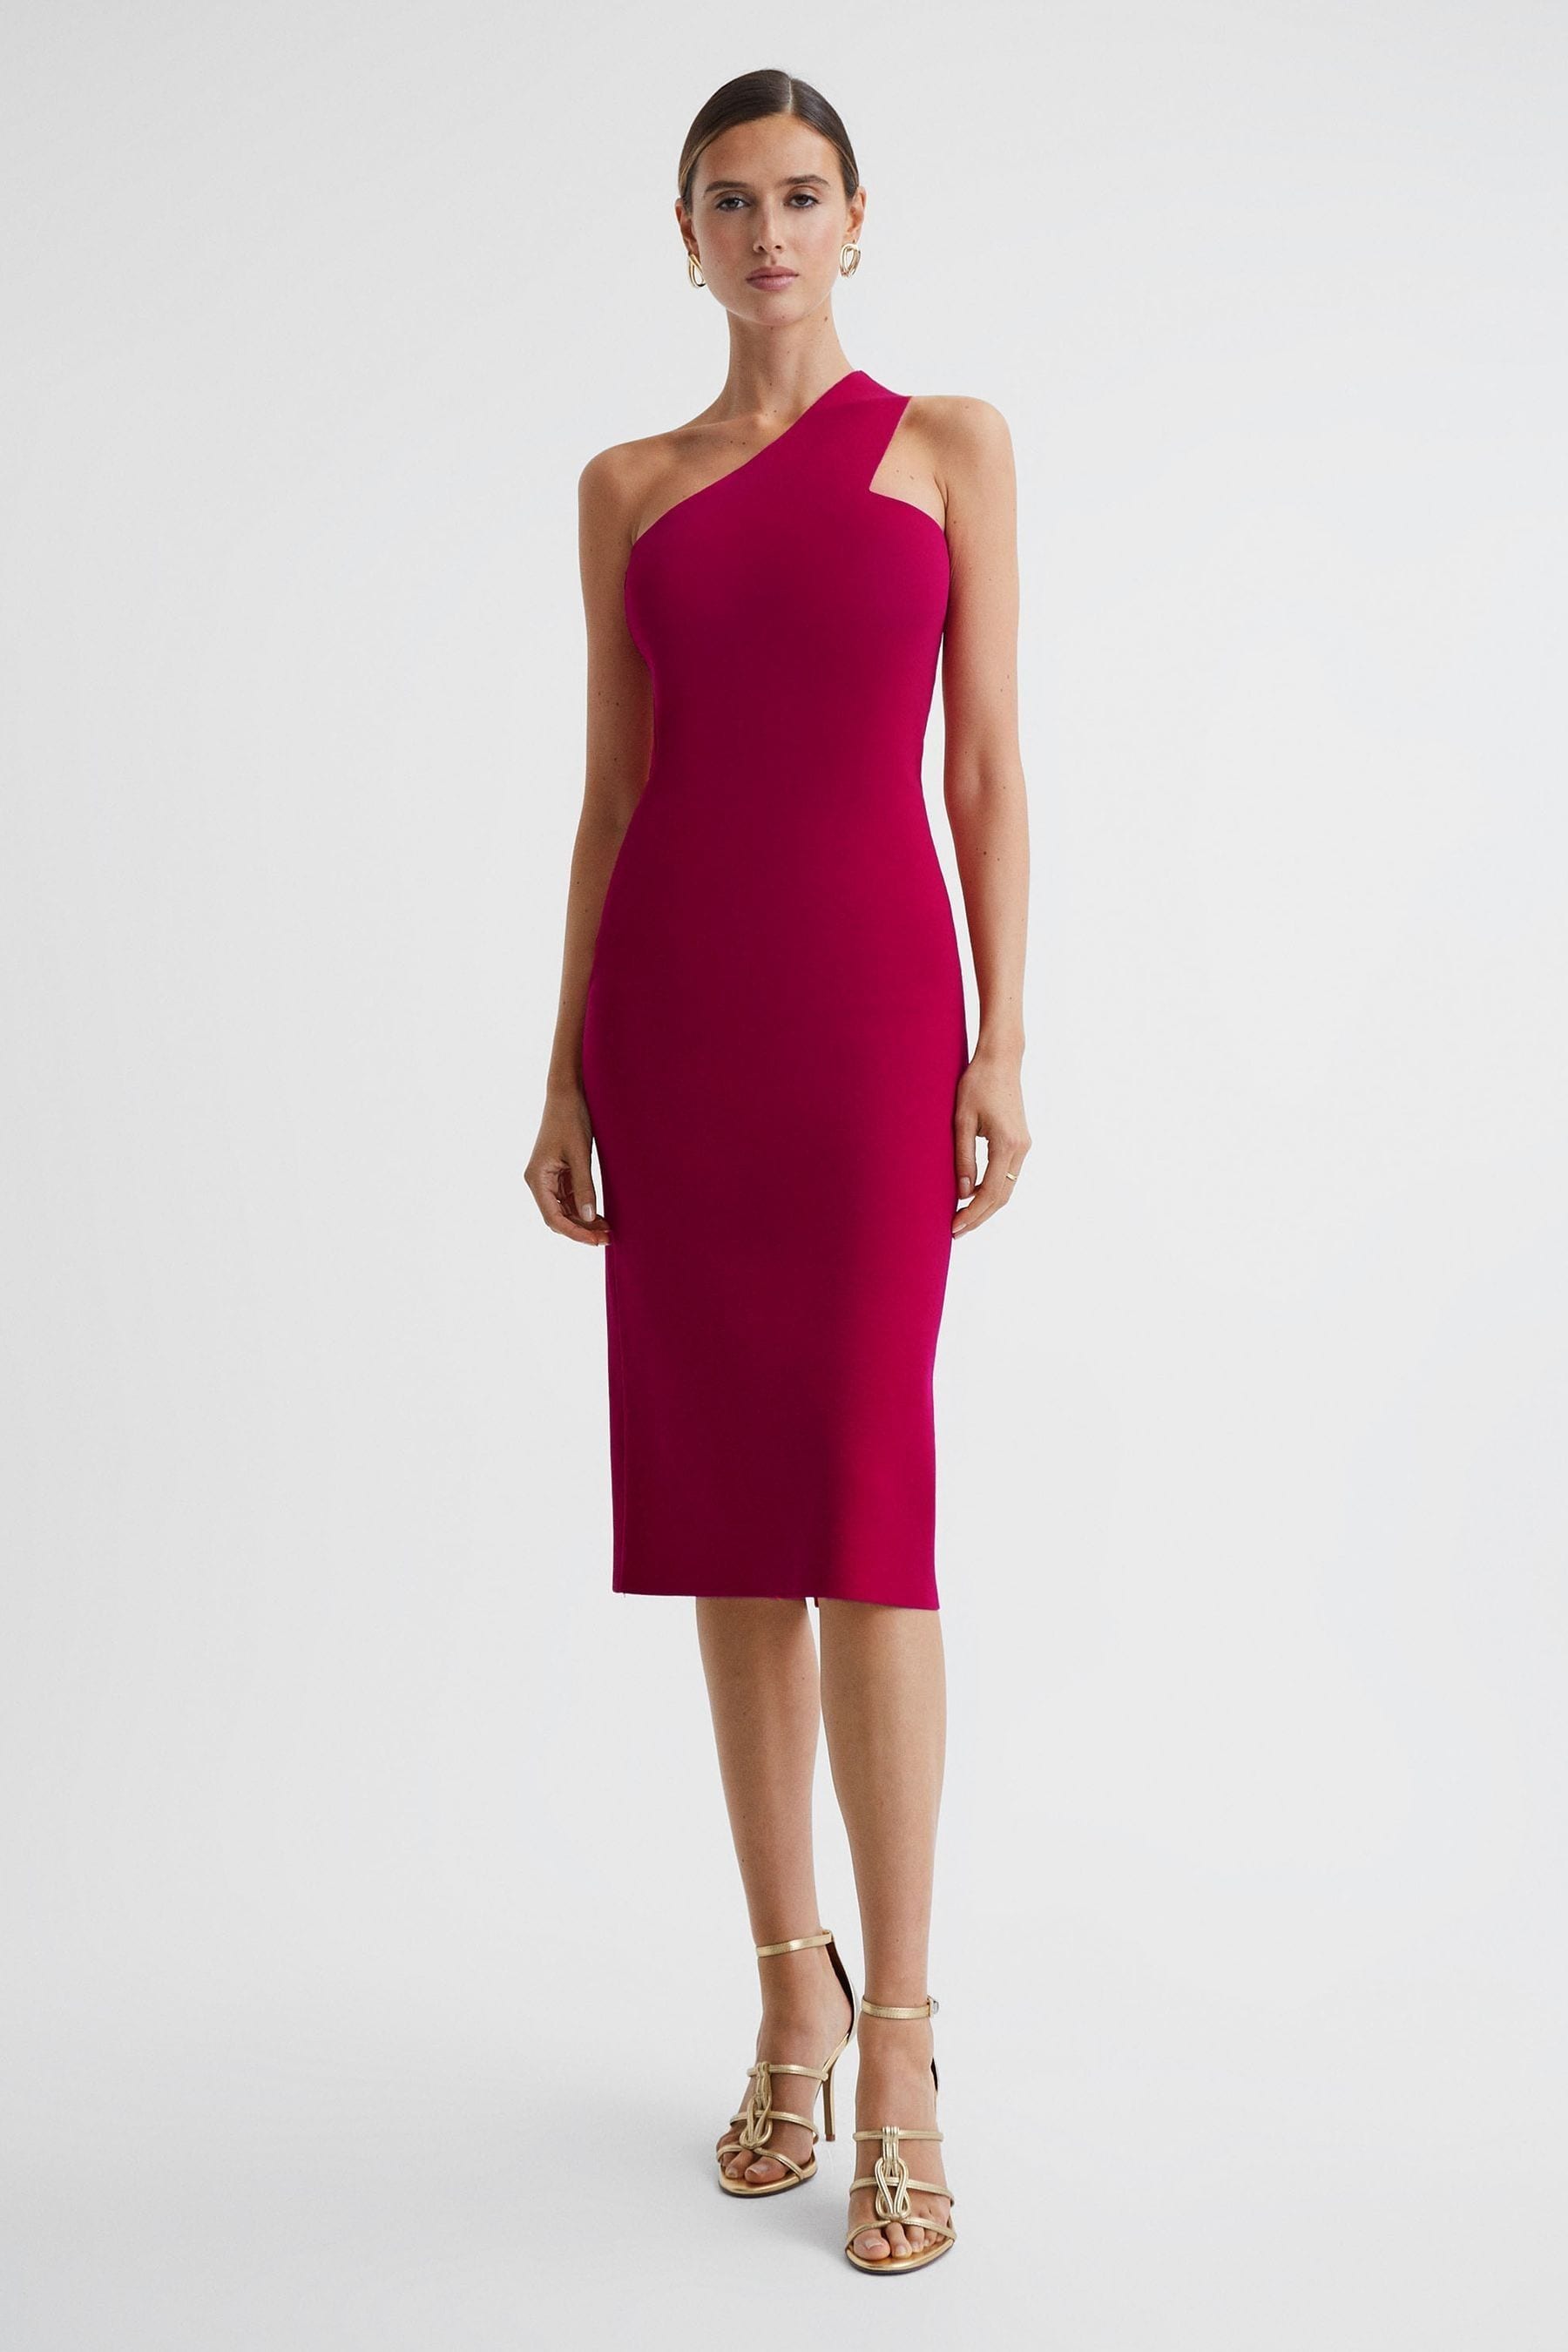 Shop Reiss Lola - Pink Knitted One Shoulder Bodycon Midi Dress, S